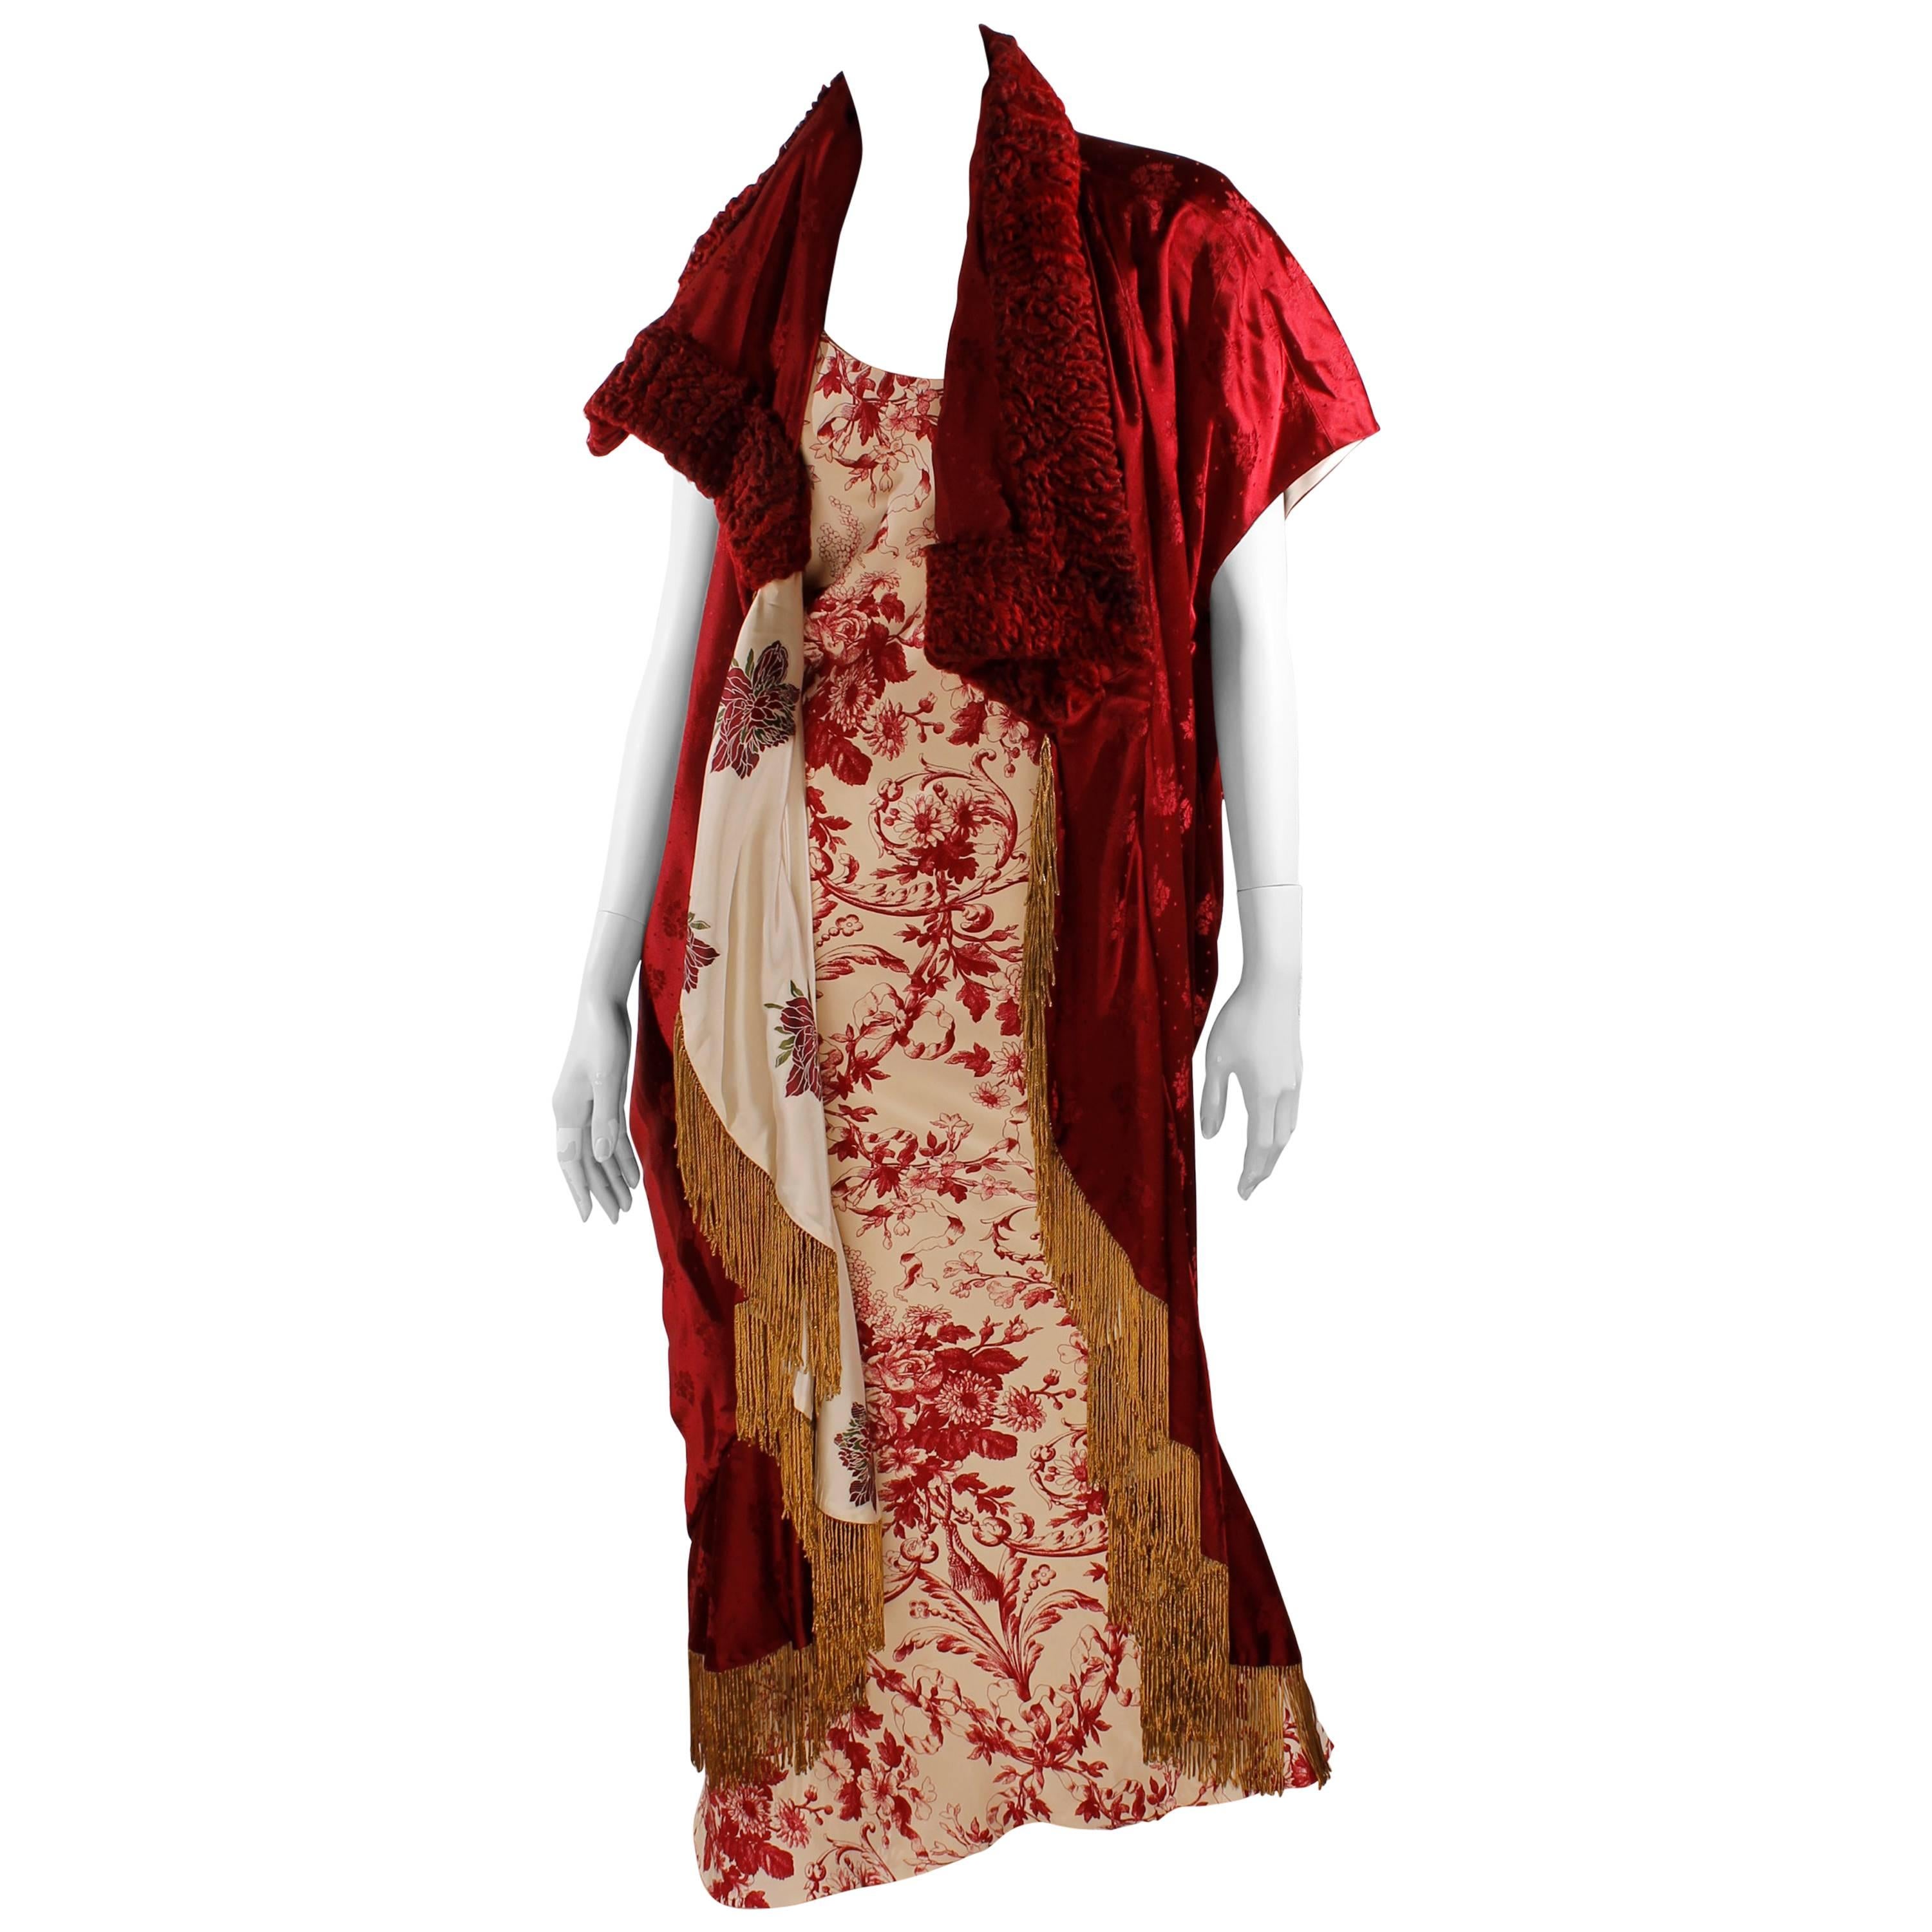 Christian Dior Evening Dress and Cape - red/ivory flowerpattern For Sale